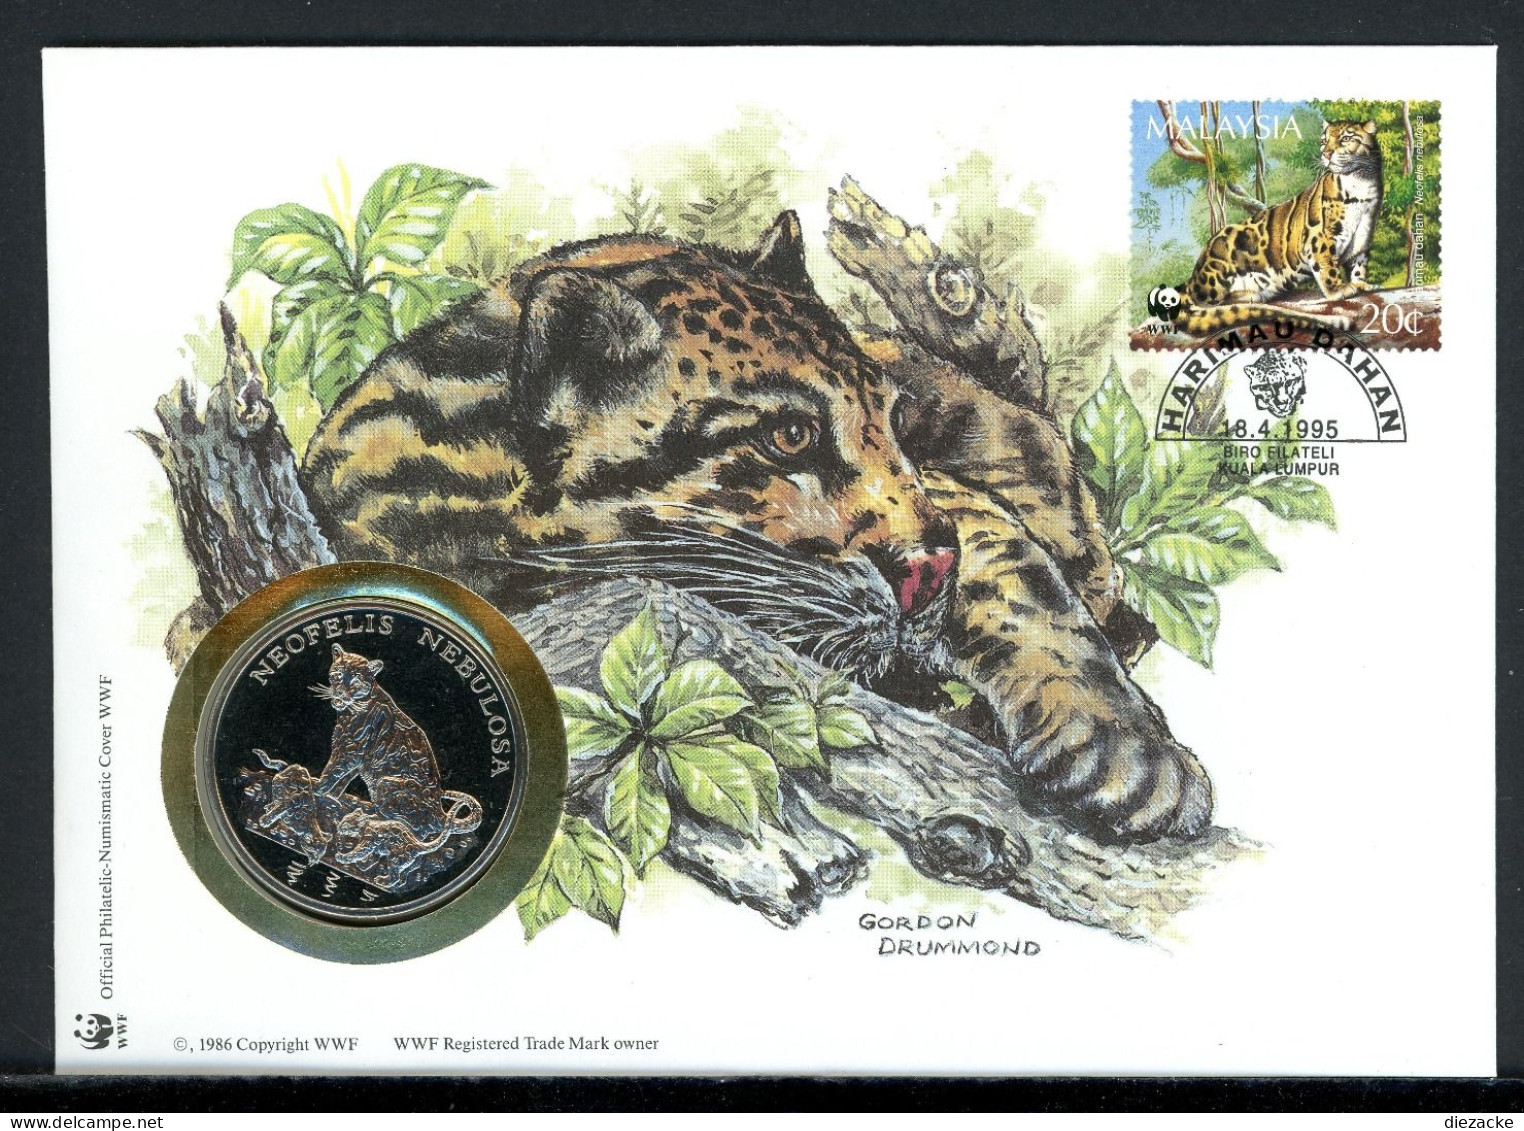 Malaysia 1995 Numisbrief Medaille Nebelparder 30 Jahre WWF, CuNi PP (MD844 - Non Classés